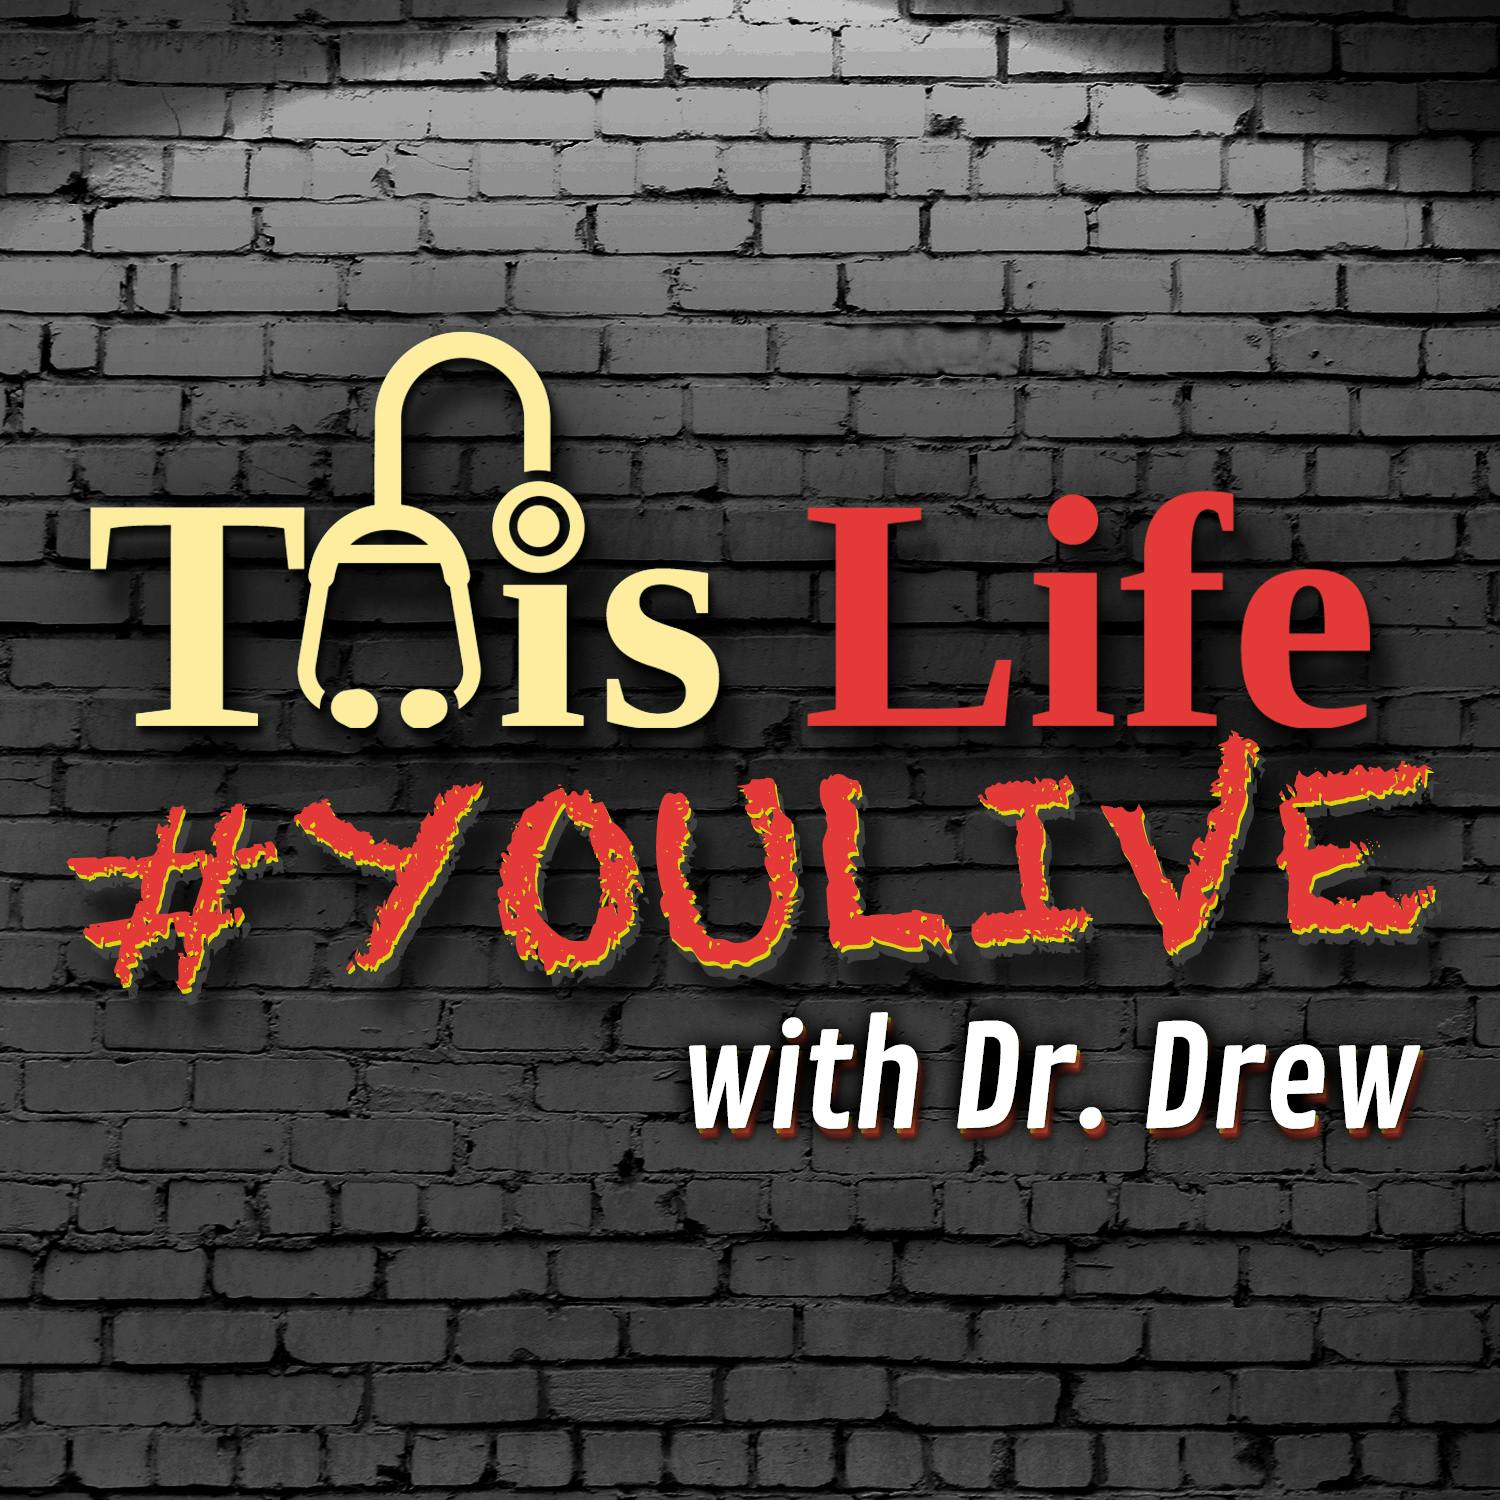 This Life 29: Dr Bruce Heischober